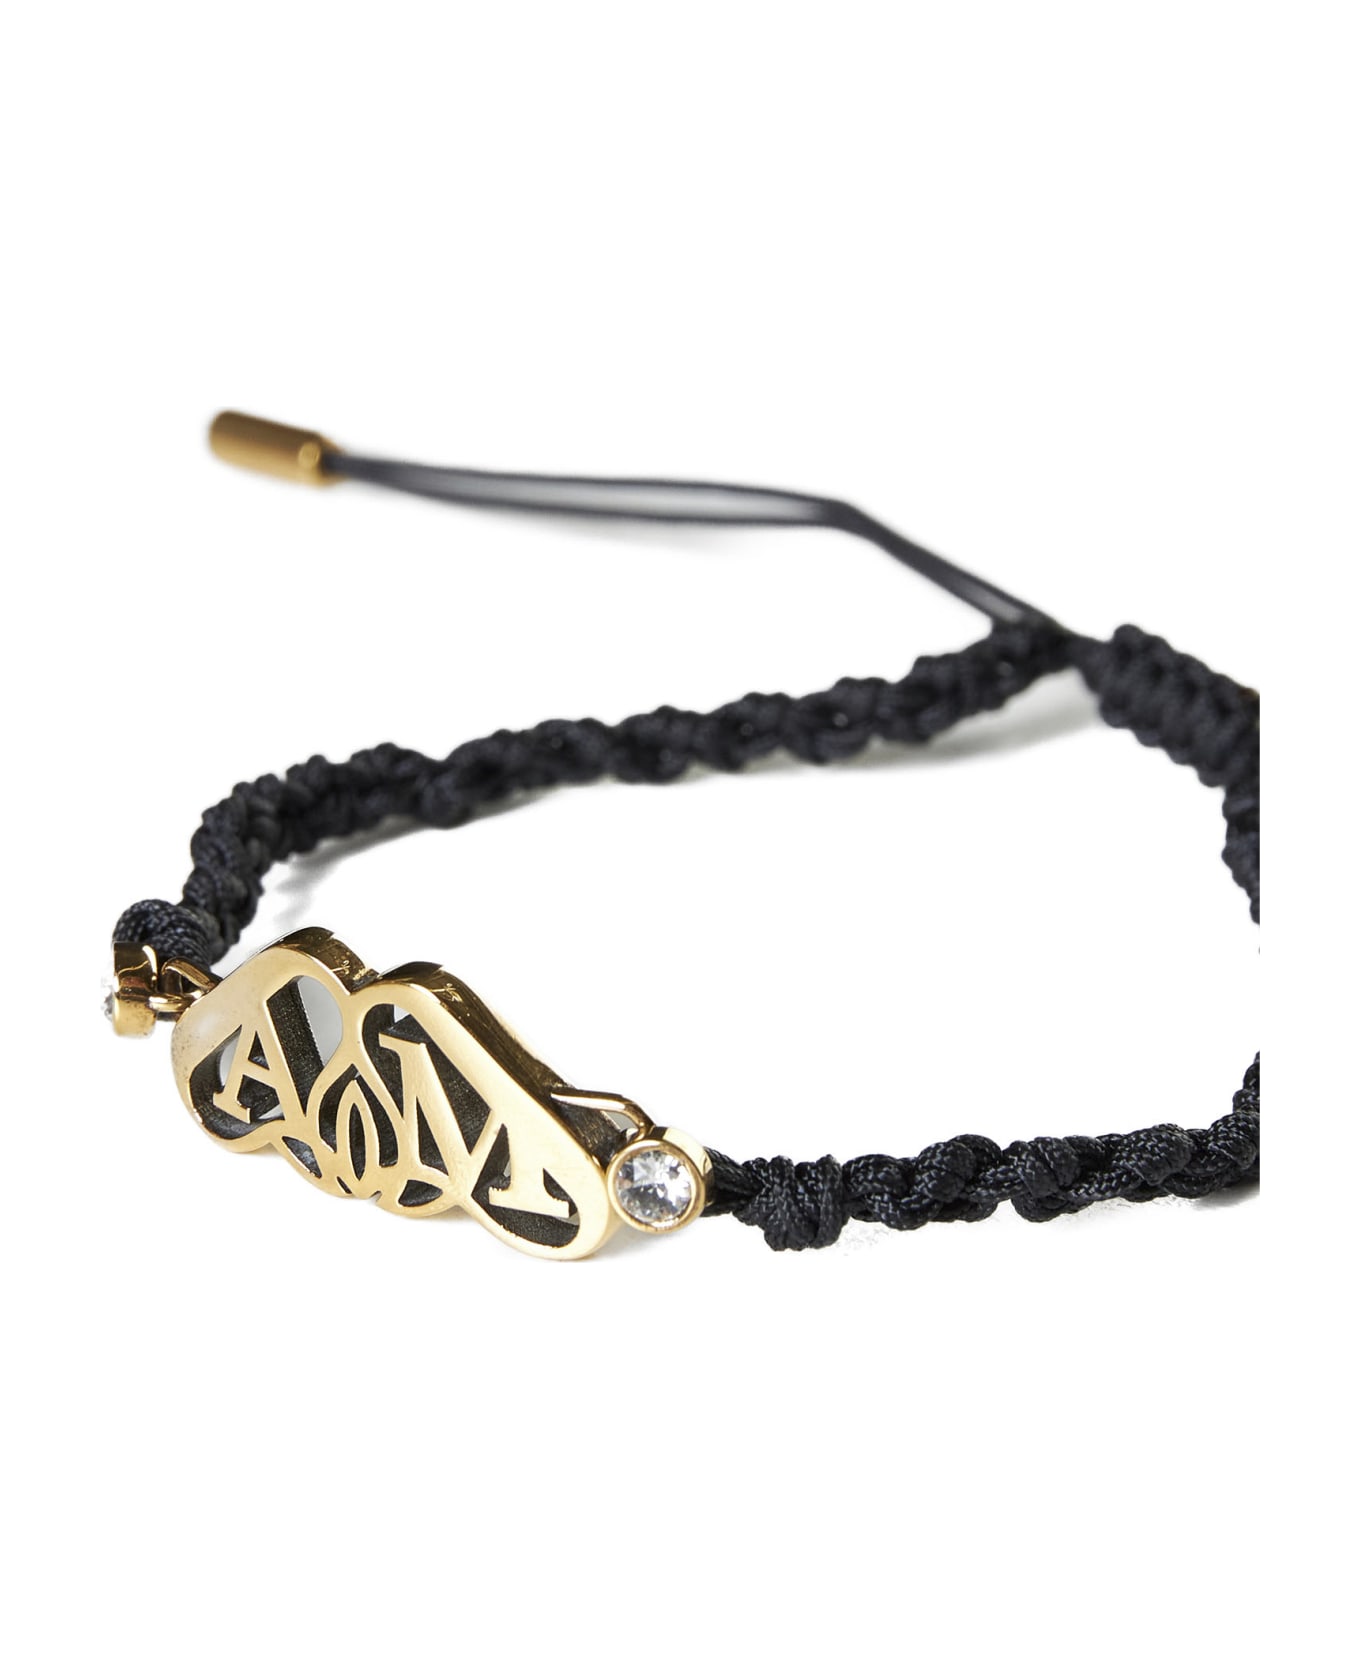 Alexander McQueen Friendship Bracelet With "seal" Logo - Blk+l.a.gold ブレスレット